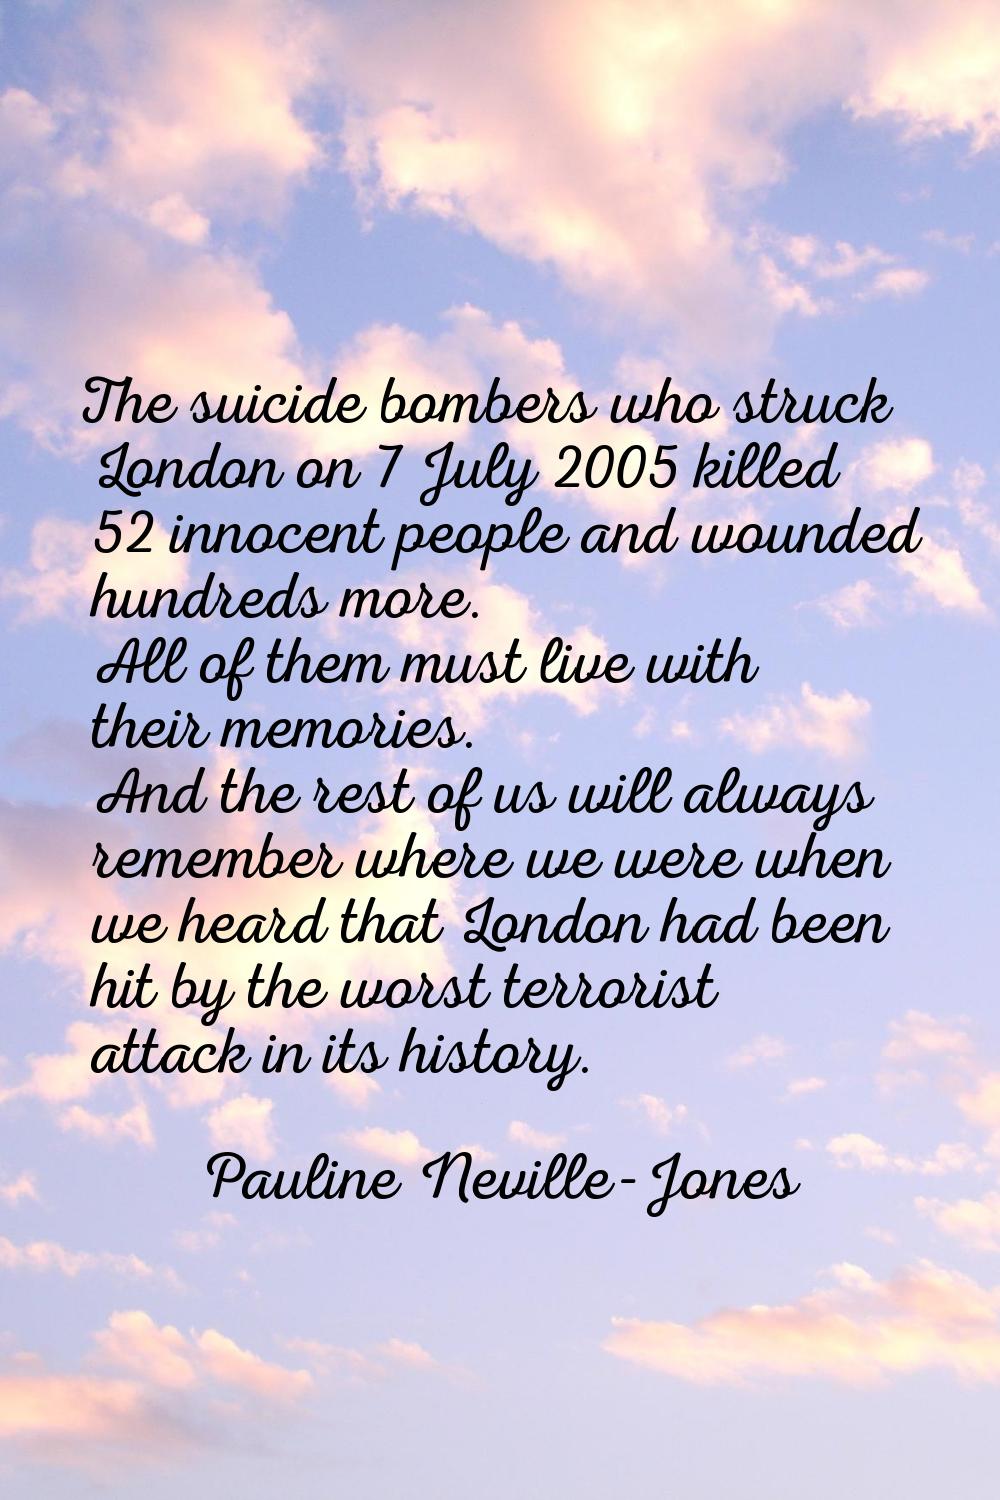 The suicide bombers who struck London on 7 July 2005 killed 52 innocent people and wounded hundreds